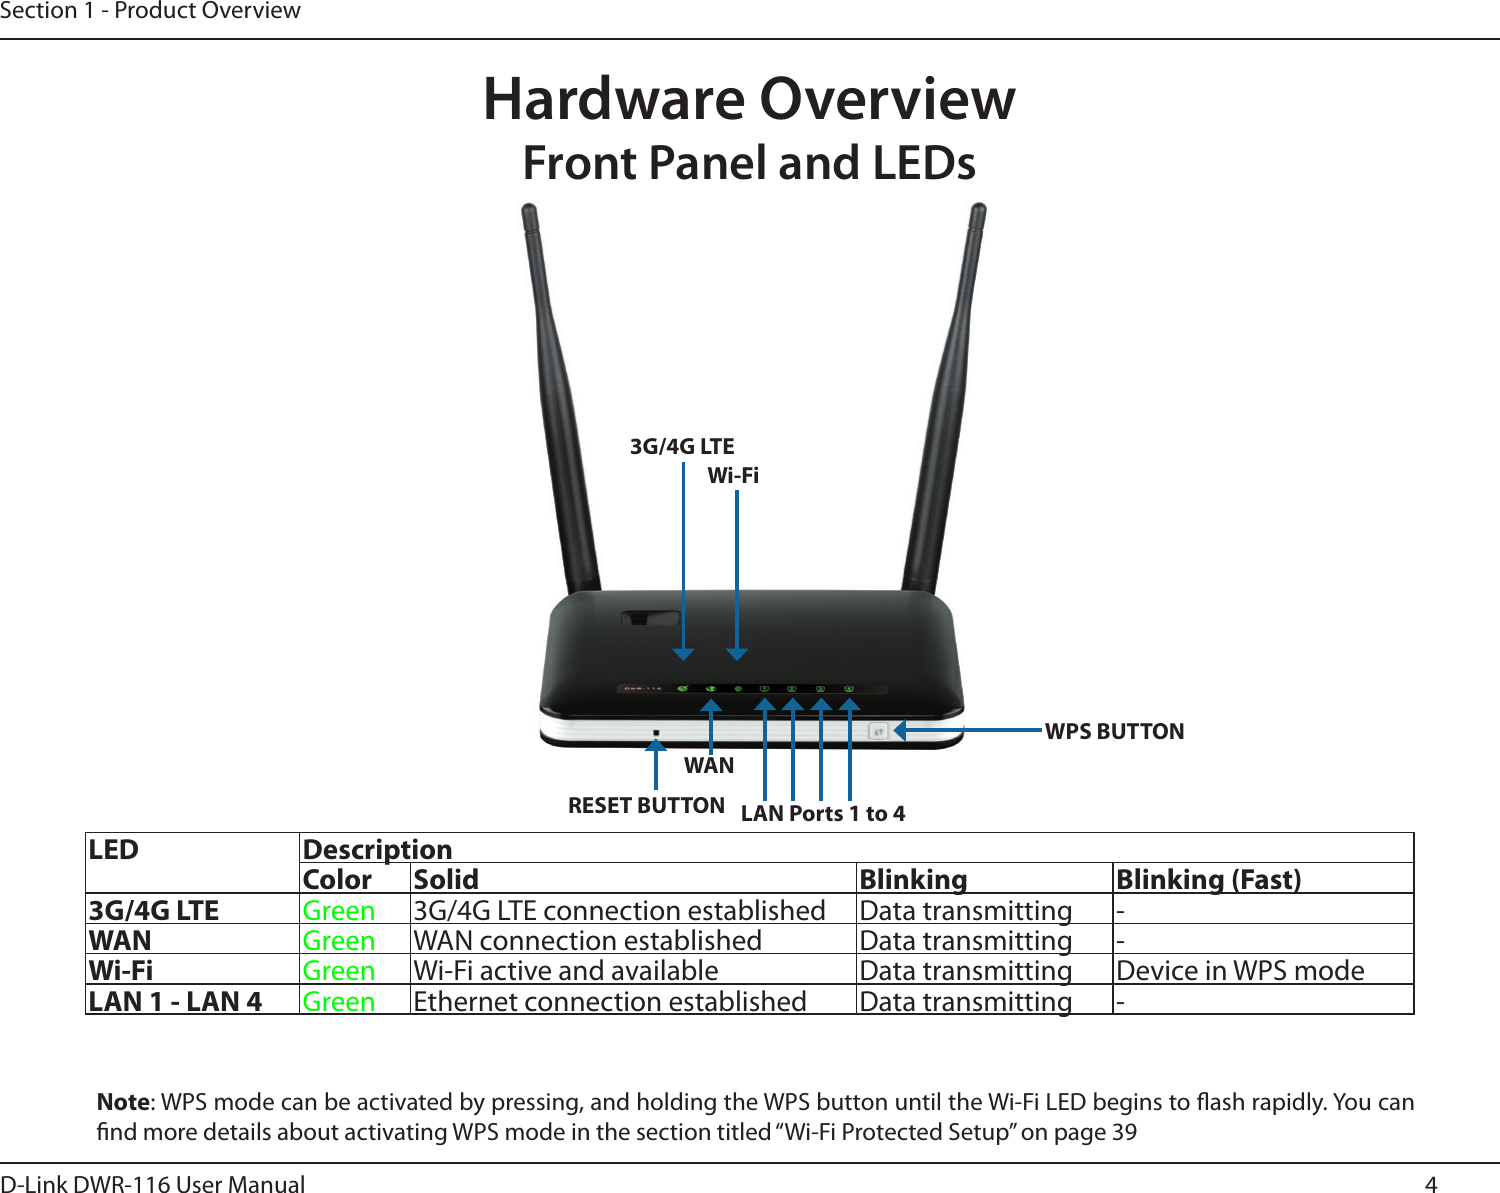 4D-Link DWR-116 User ManualSection 1 - Product OverviewHardware OverviewFront Panel and LEDs3G/4G LTEWANWi-FiLAN Ports 1 to 4WPS BUTTONRESET BUTTONLED DescriptionColor Solid Blinking Blinking (Fast)3G/4G LTE Green 3G/4G LTE connection established Data transmitting -WAN Green WAN connection established Data transmitting -Wi-Fi Green Wi-Fi active and available Data transmitting Device in WPS modeLAN 1 - LAN 4 Green Ethernet connection established Data transmitting -Note: WPS mode can be activated by pressing, and holding the WPS button until the Wi-Fi LED begins to ash rapidly. You can nd more details about activating WPS mode in the section titled “Wi-Fi Protected Setup” on page 39